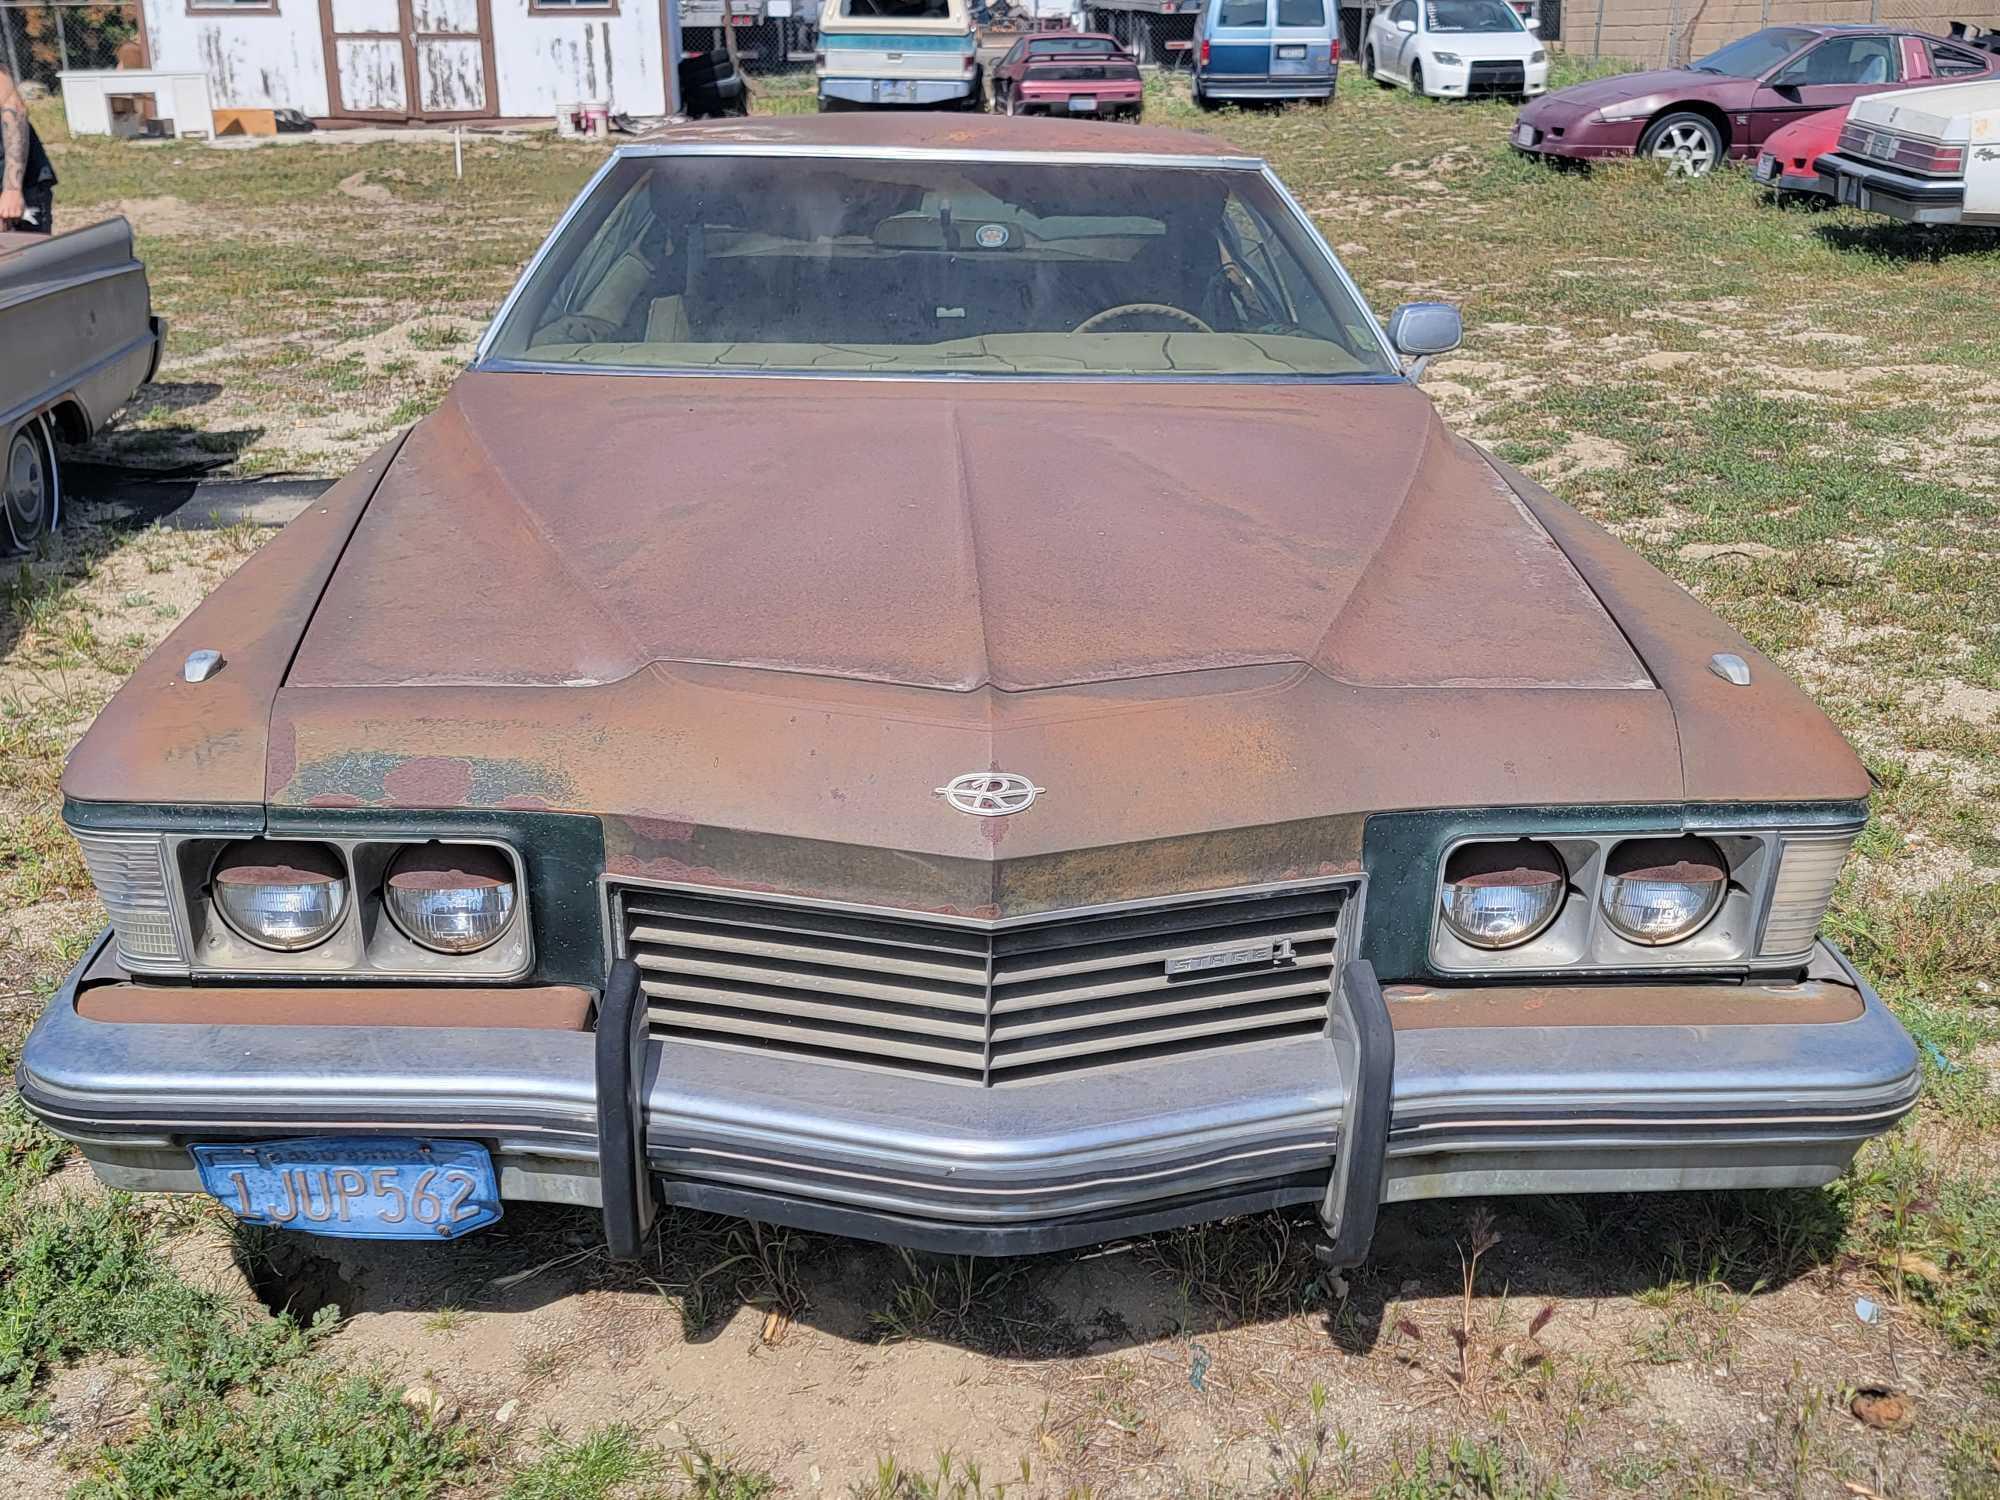 1973 Buick Riviera 2 Door Coupe Project Car with title